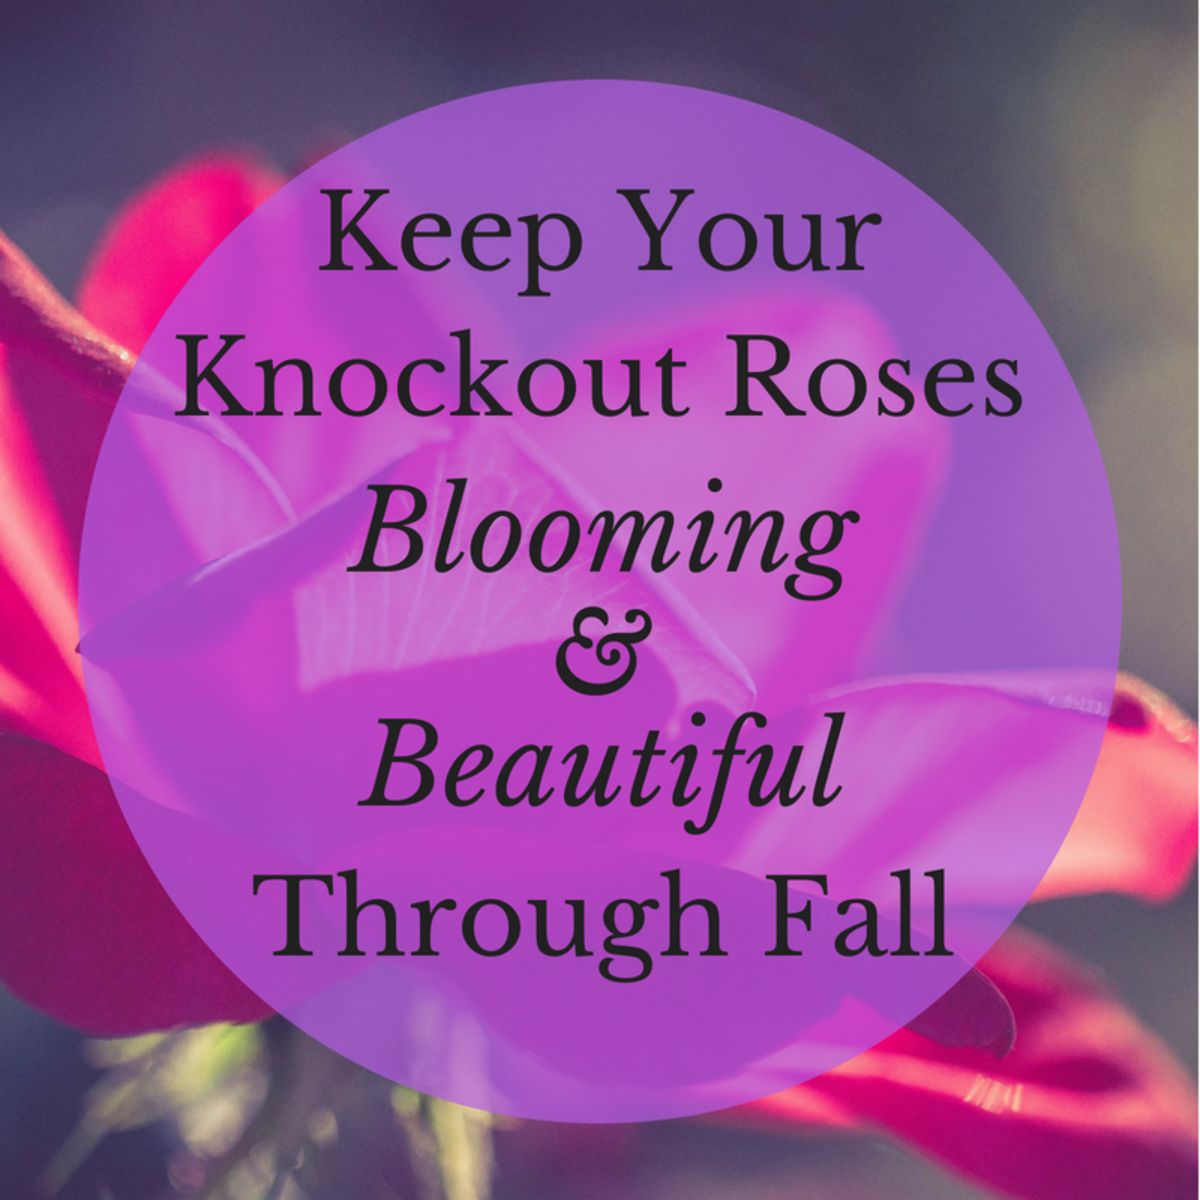 As one of the hardiest varieties of roses, Knockouts can withstand tougher conditions than most other roses. This guide will help you learn how to keep them blooming well through the fall season.